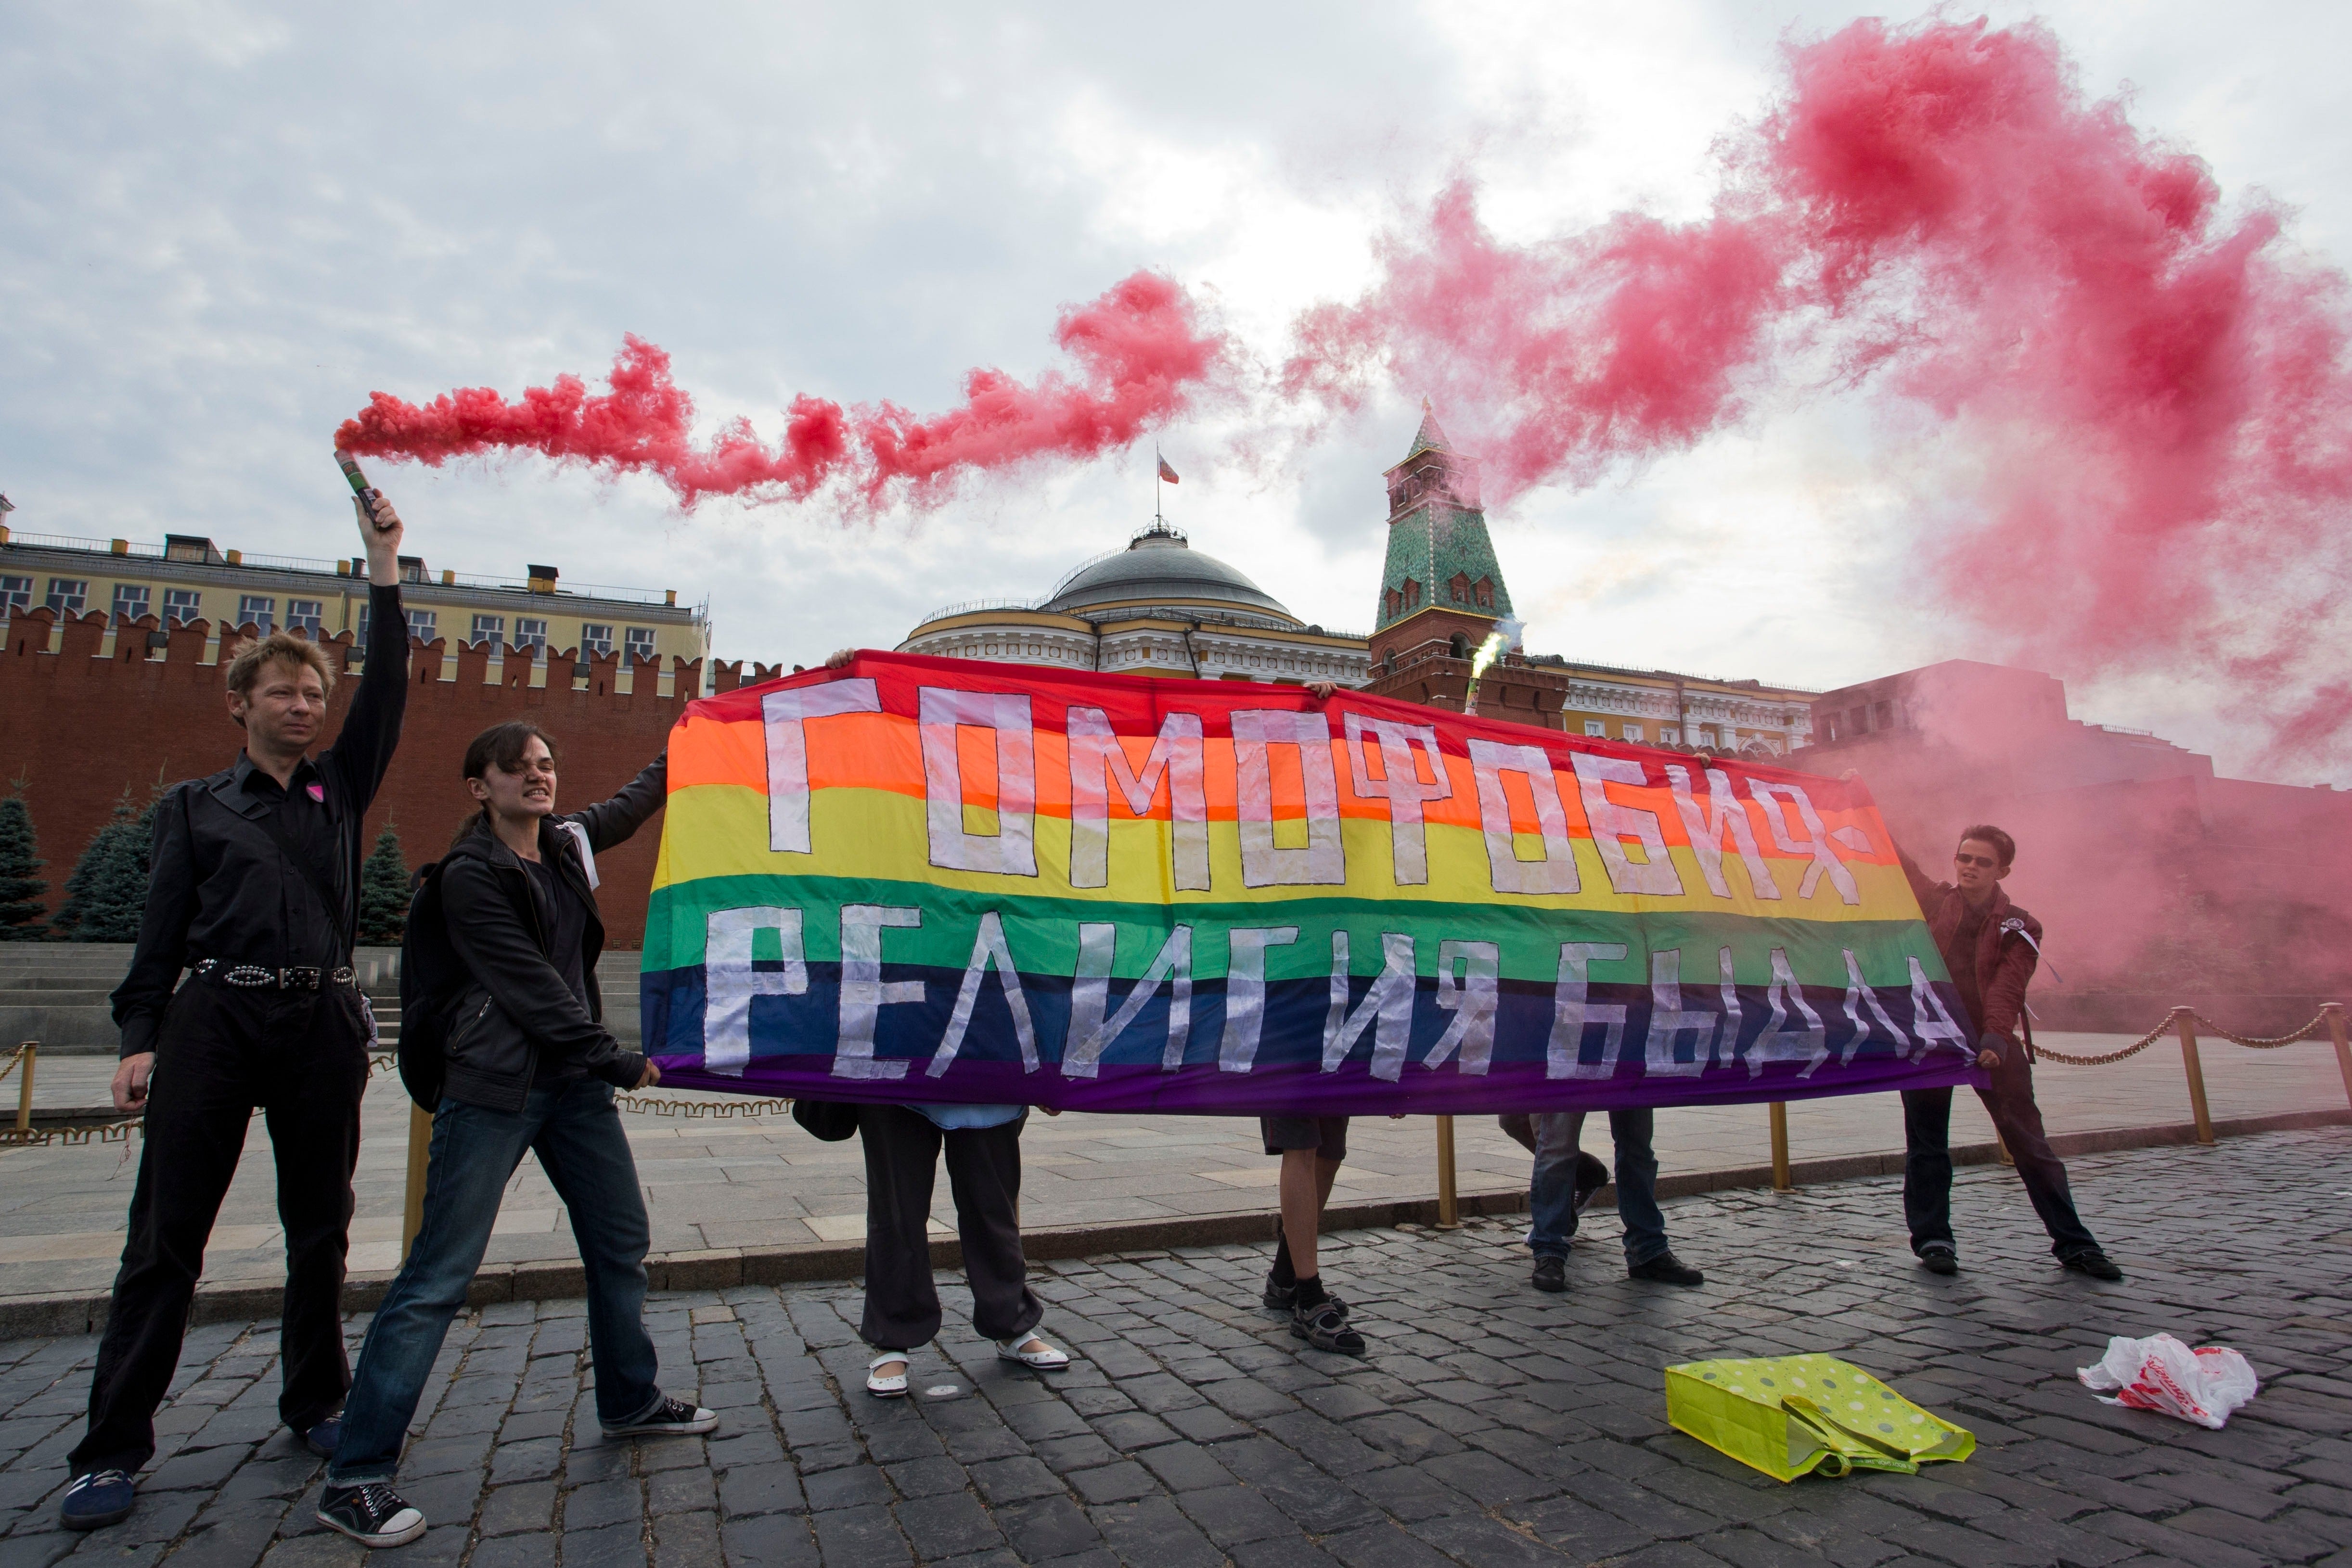 Gay rights activists hold a banner reading ‘Homophobia - the religion of bullies’ during their action in protest at homophobia, on Red Square in Moscow, Russia, on July 14, 2013